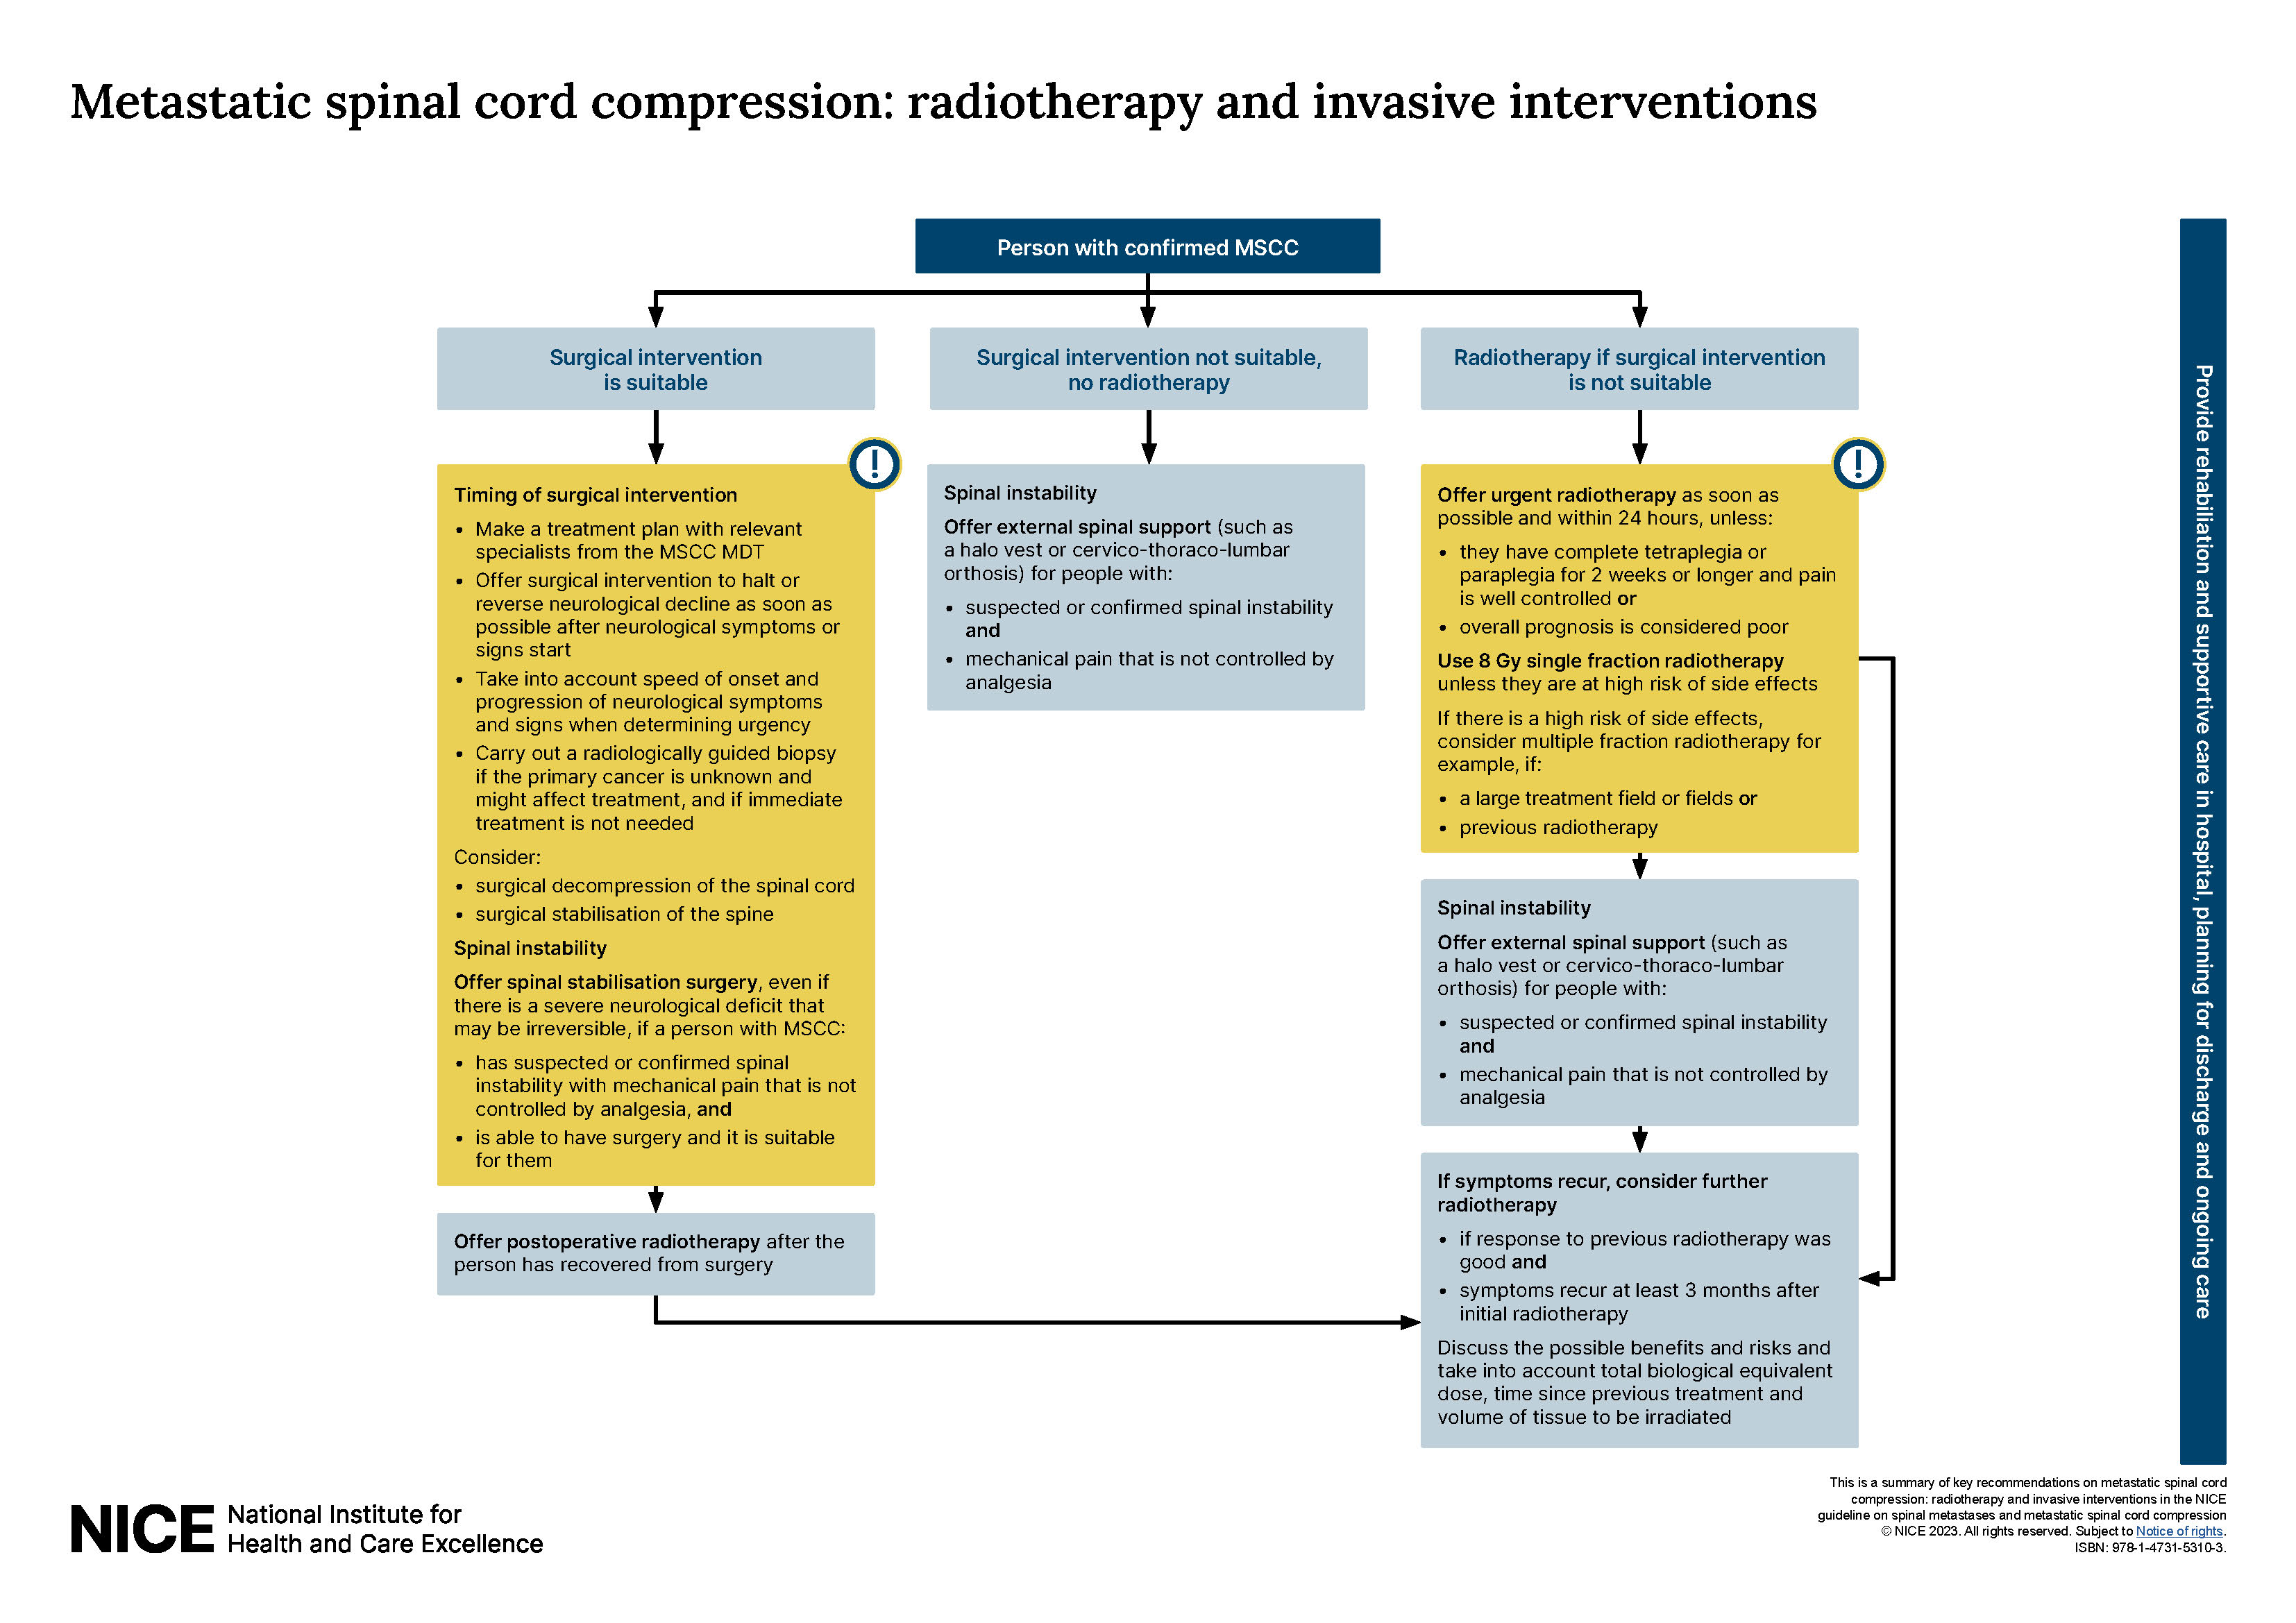 View visual summary on metastatic spinal cord compression: radiotherapy and invasive interventions